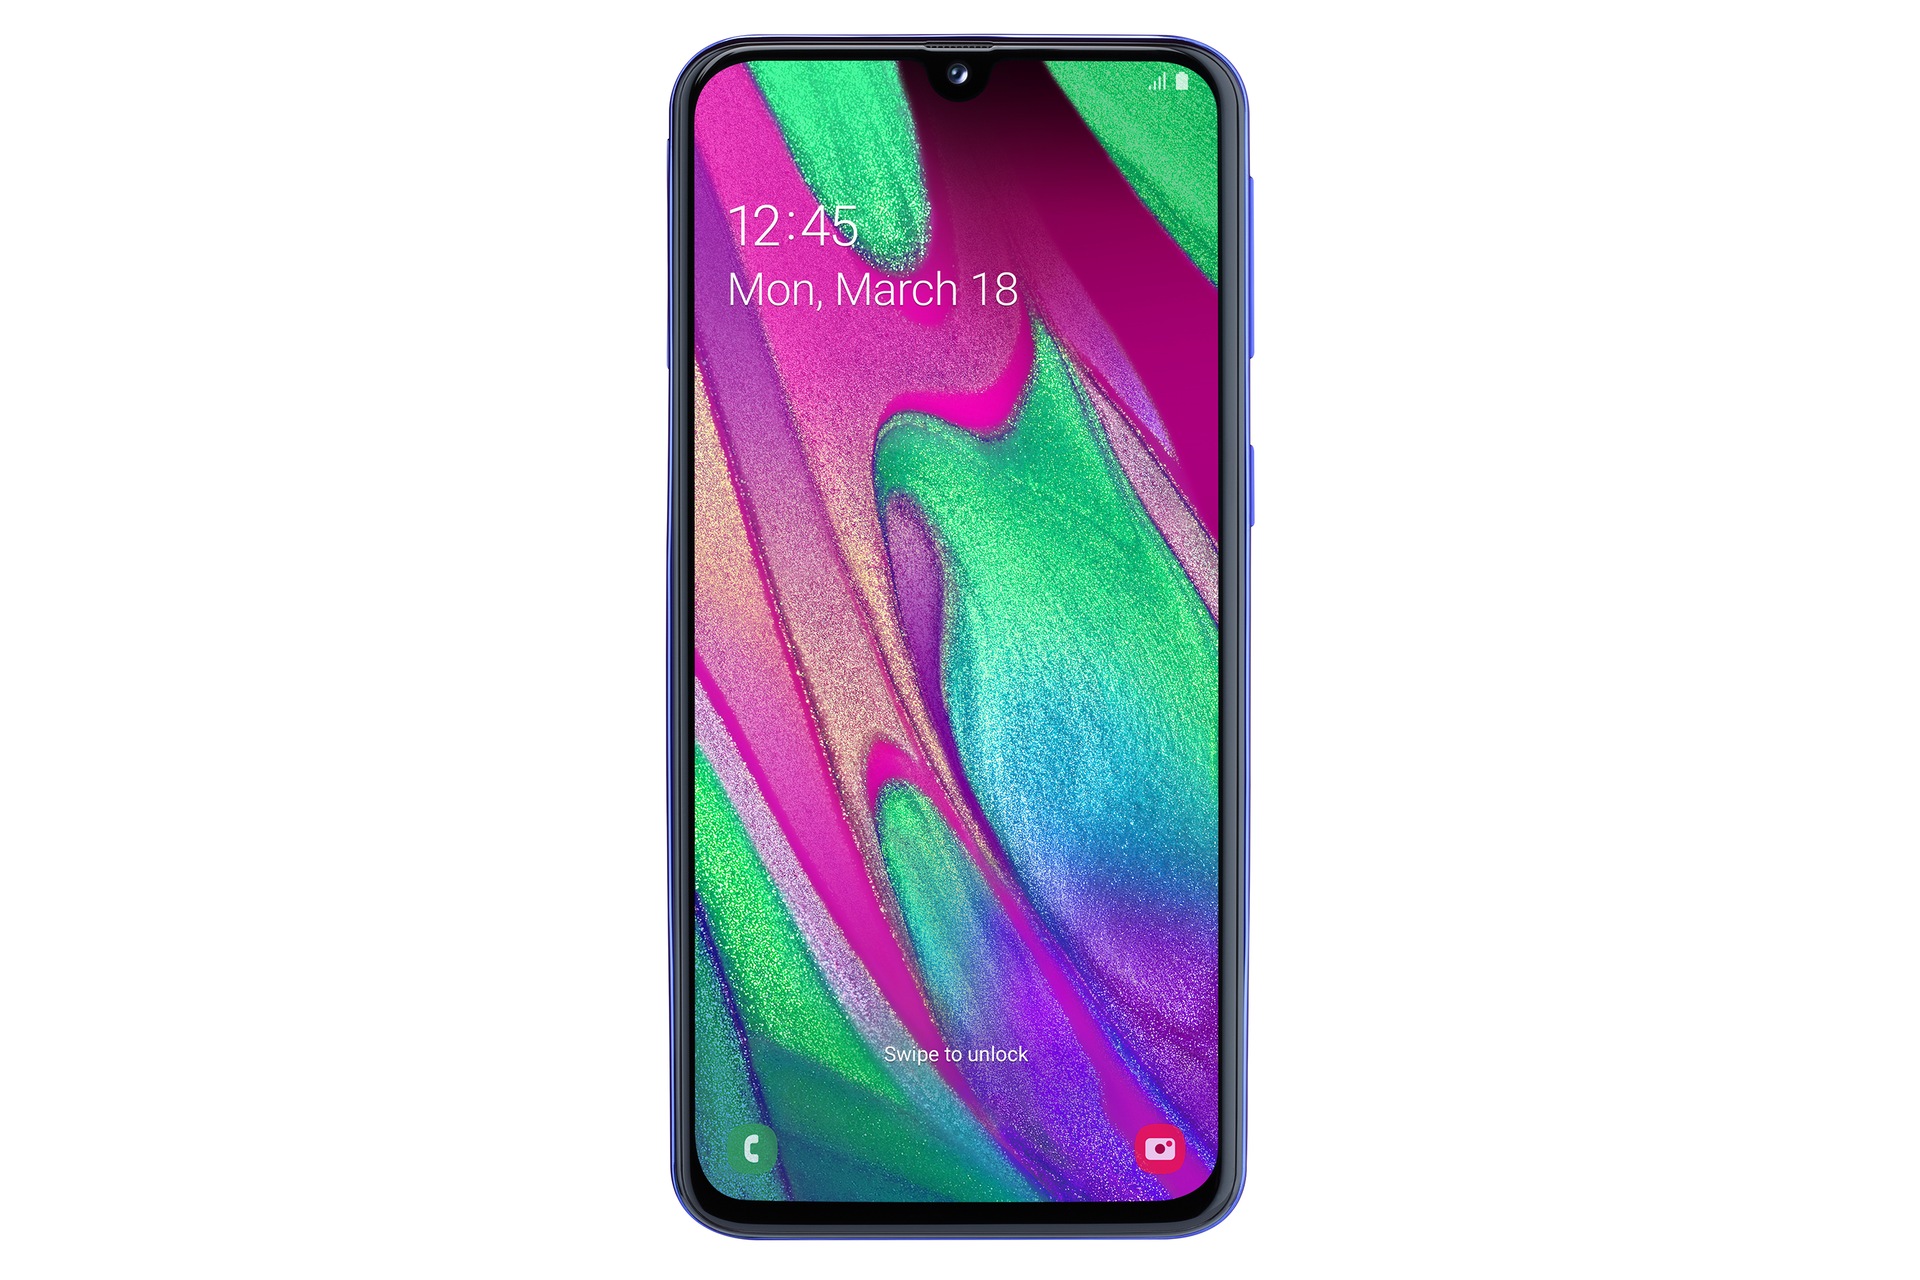 https://images.samsung.com/is/image/samsung/ch-fr-galaxy-a40-a405fnds-sm-a405fzbdaut-frontblue-161027664?$650_519_PNG$